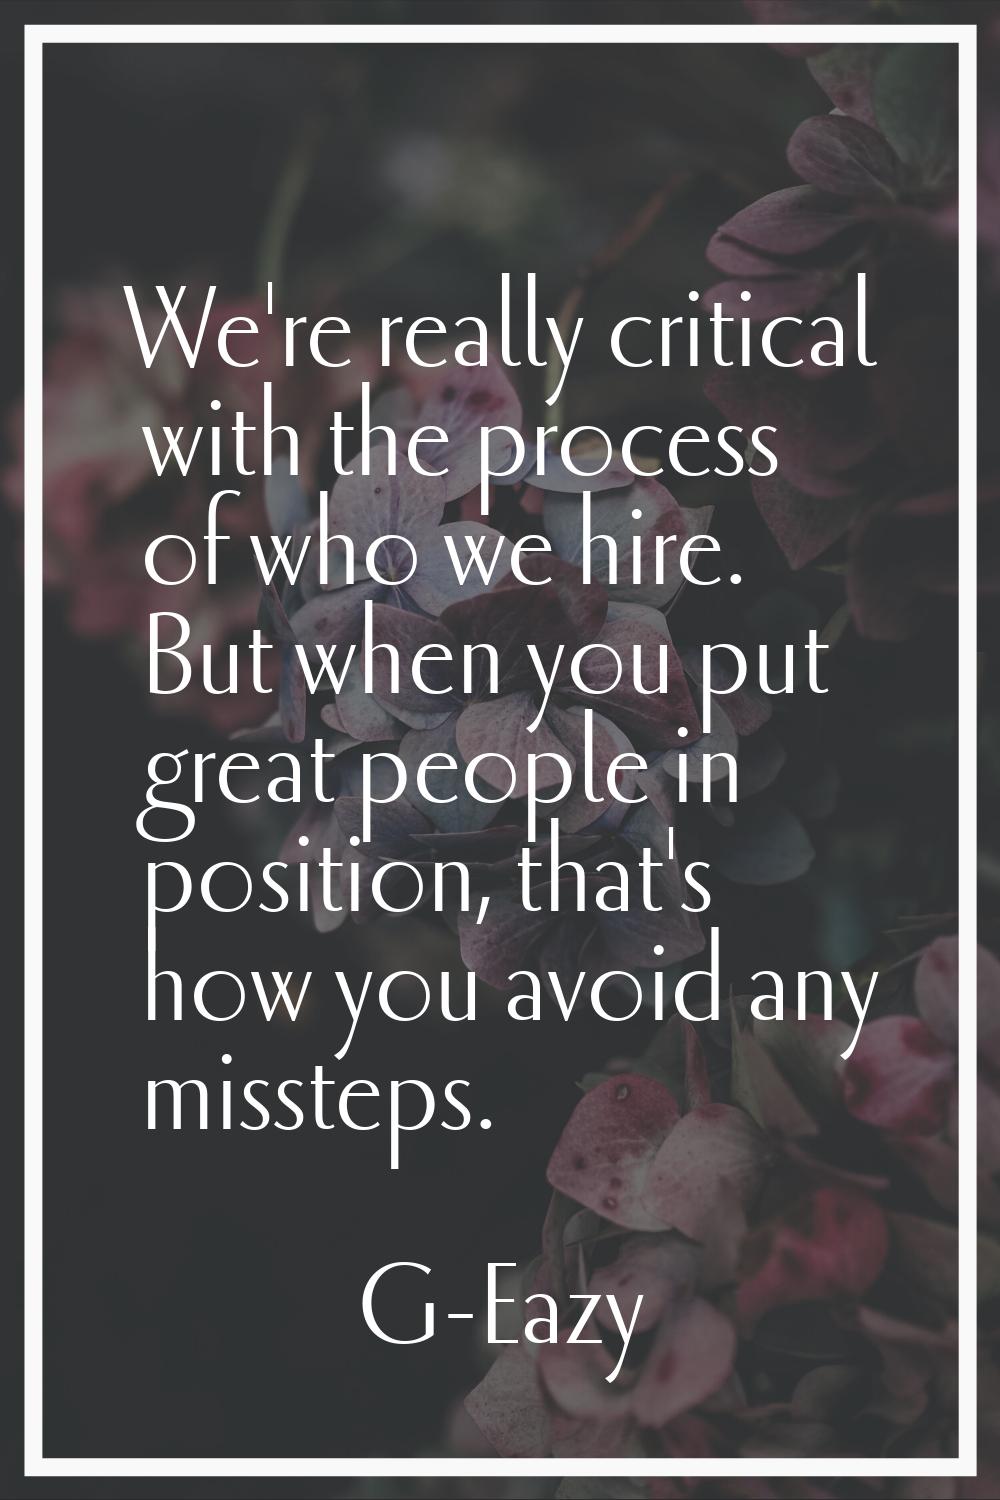 We're really critical with the process of who we hire. But when you put great people in position, t